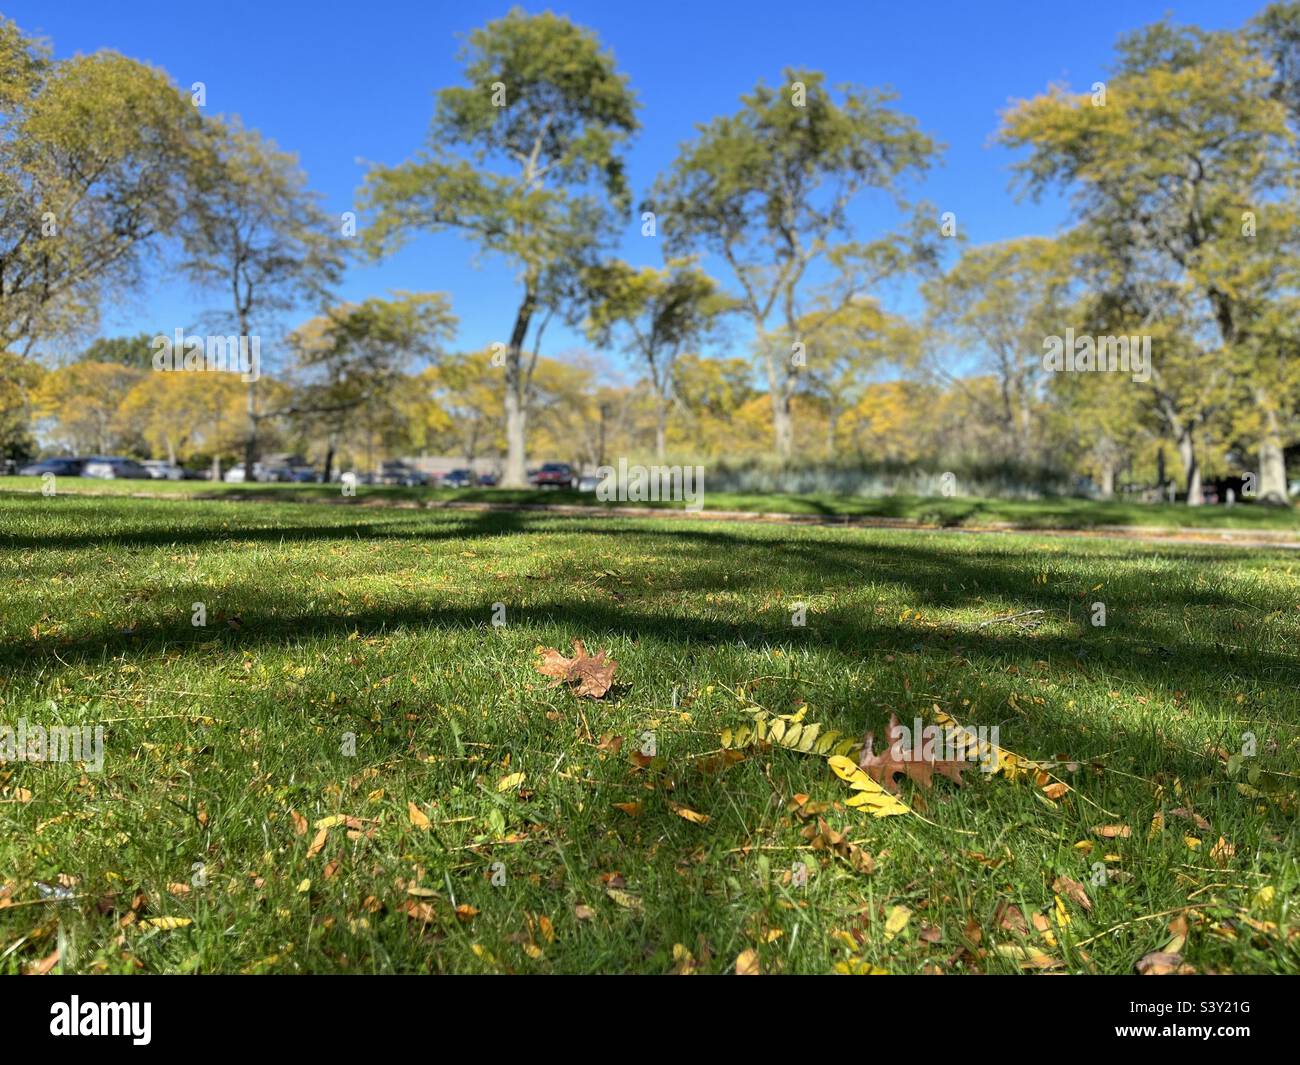 Autumn Leaves on the grass in the trees background Stock Photo